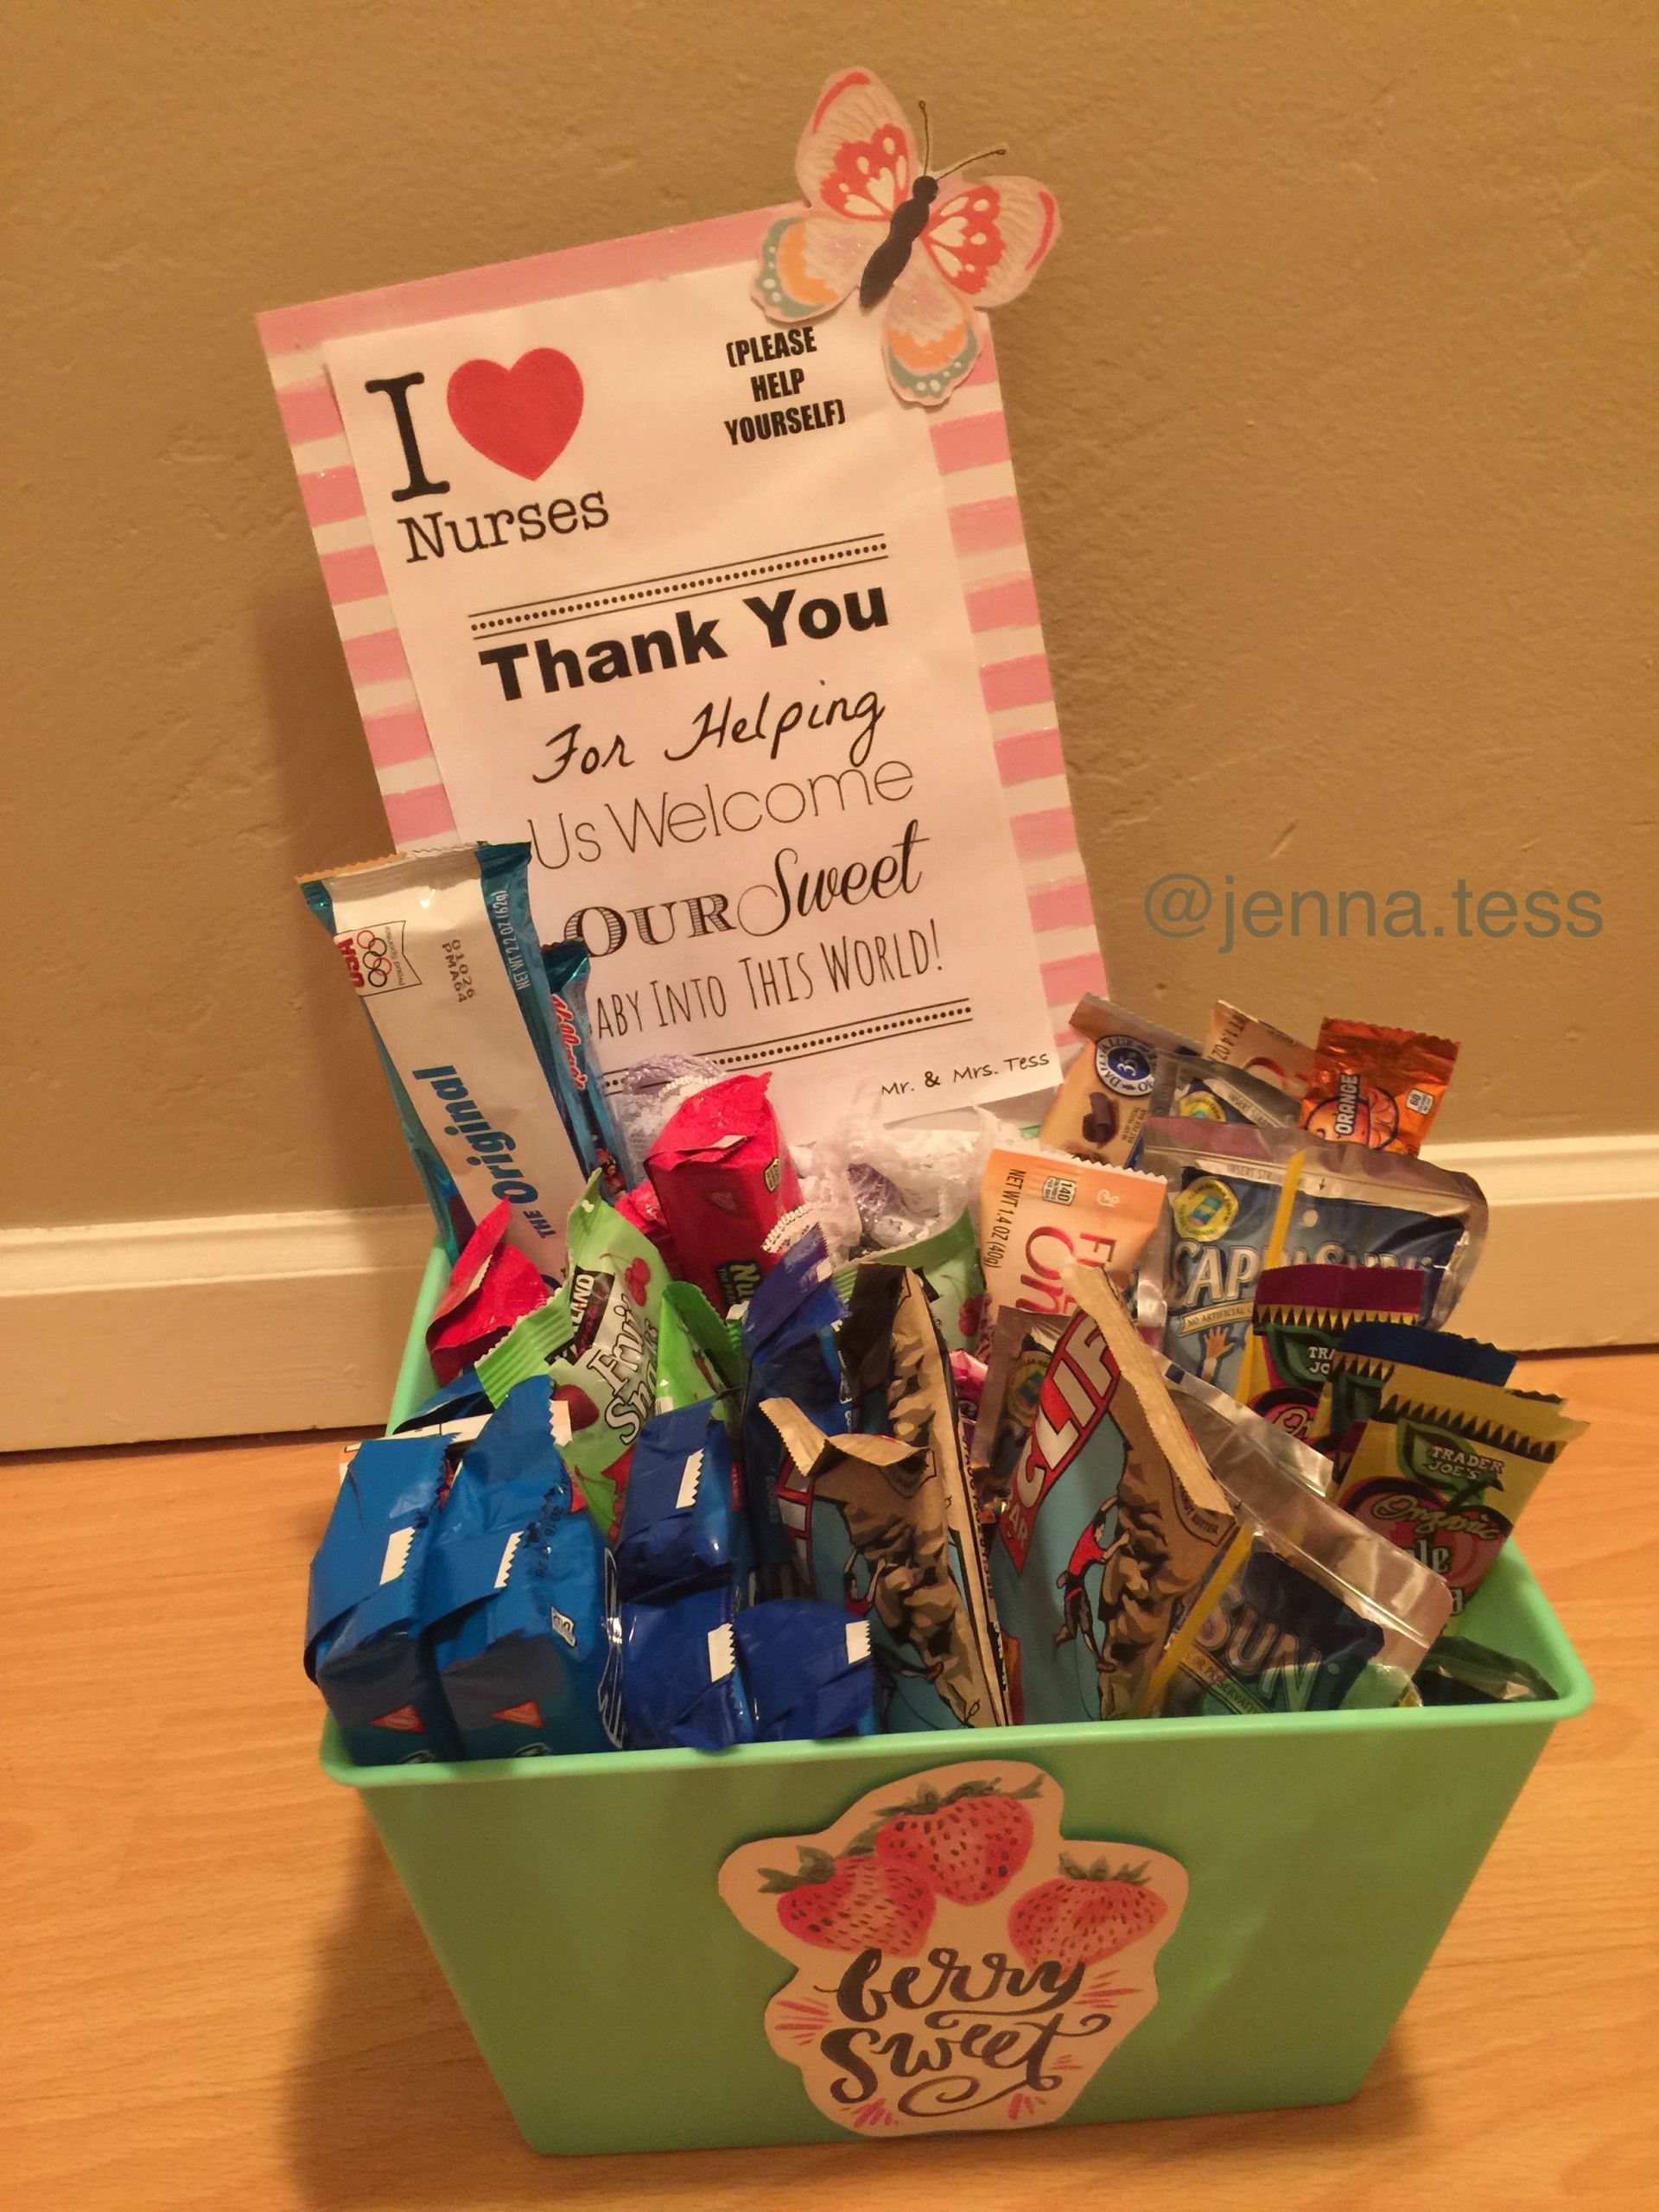 Thank You Gift For Doctor Who Delivered Baby
 The goo basket I put to her for all the labor and